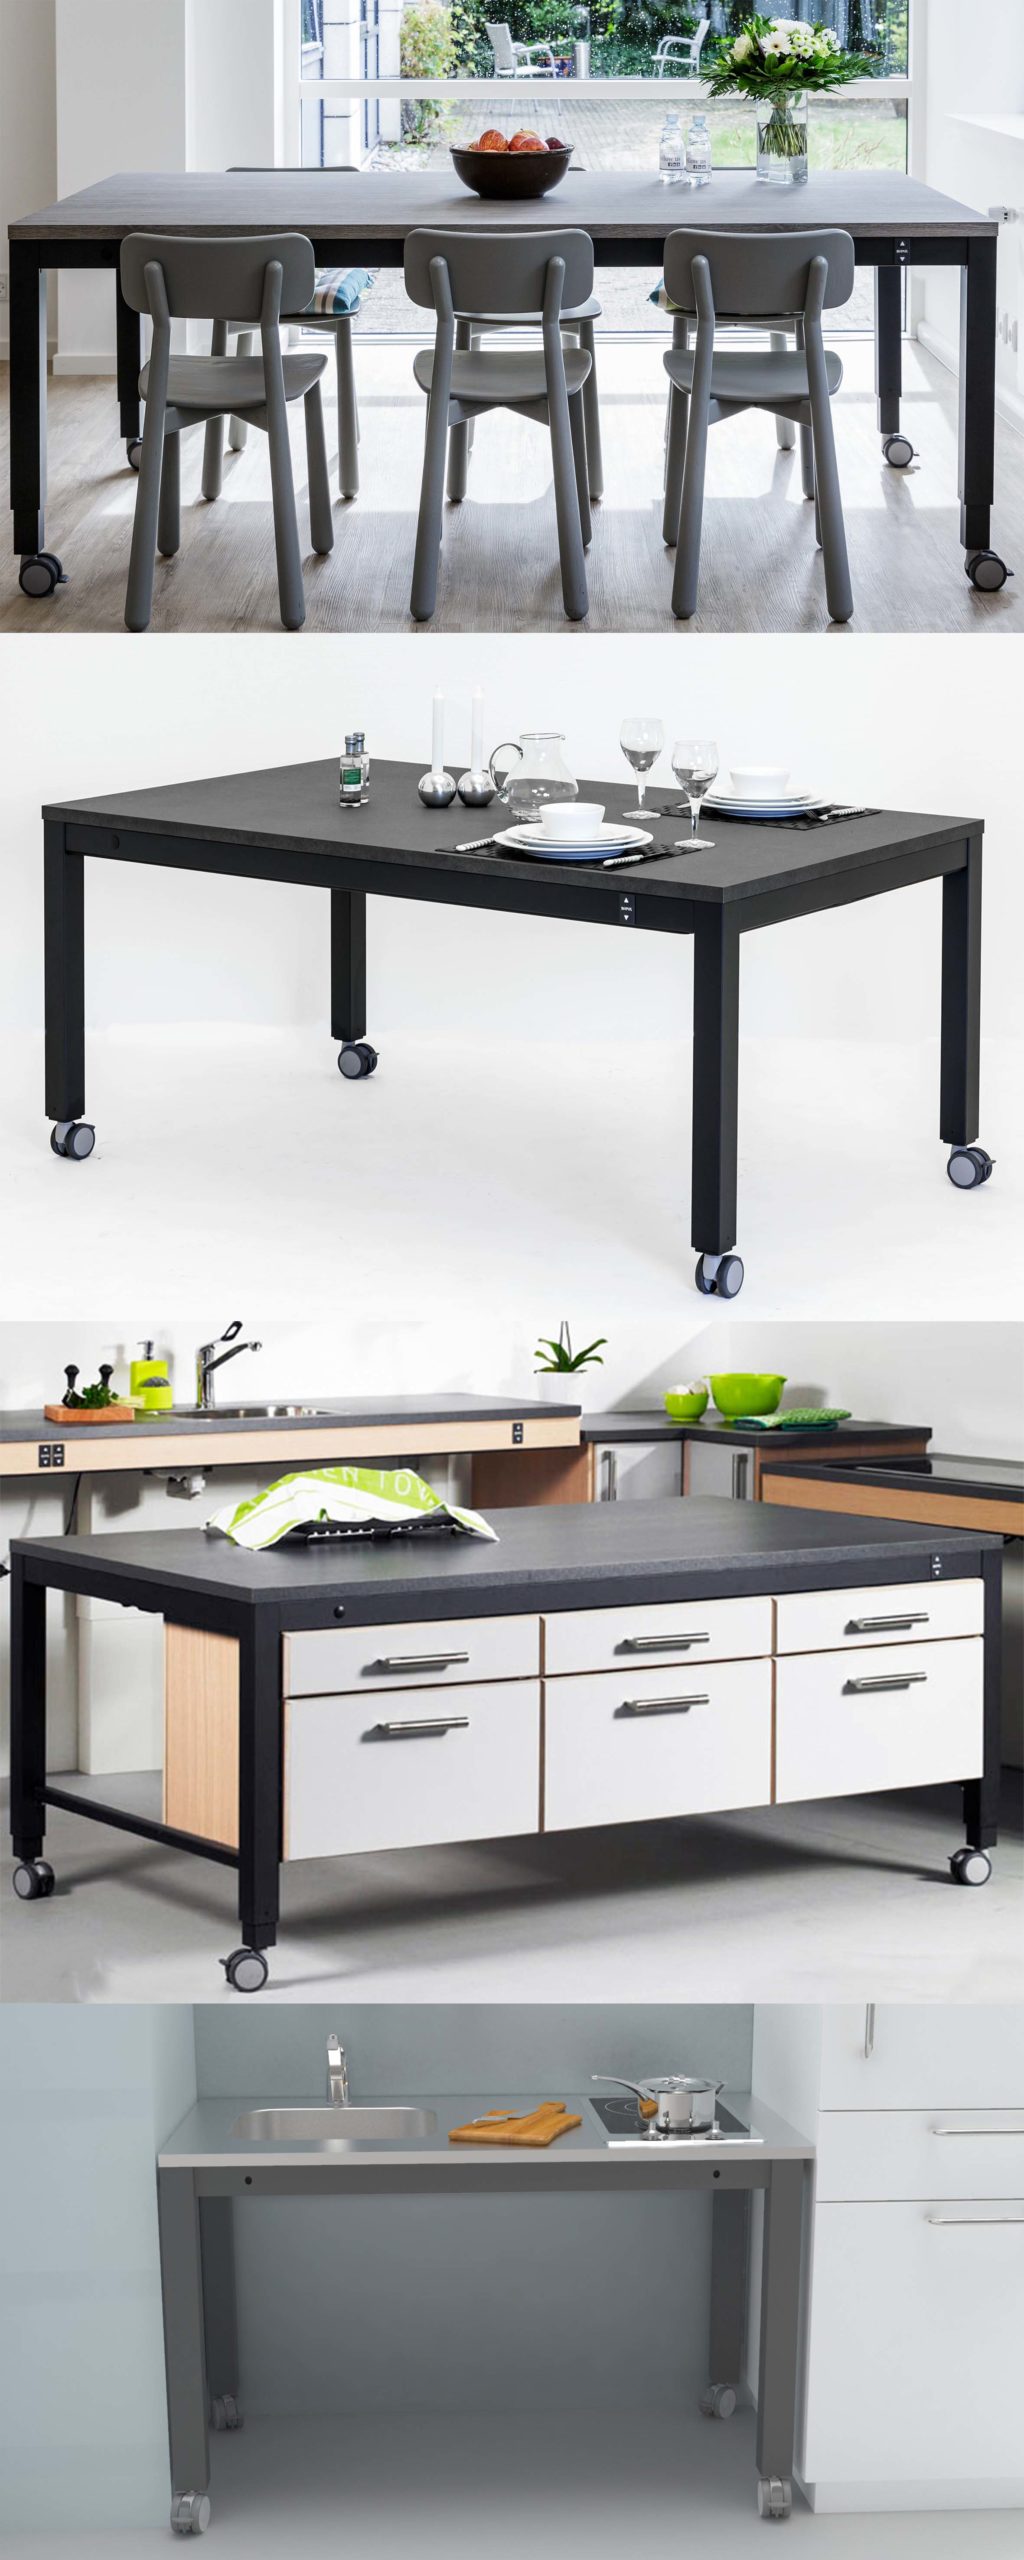 Ropox UK Table kitchen solutions